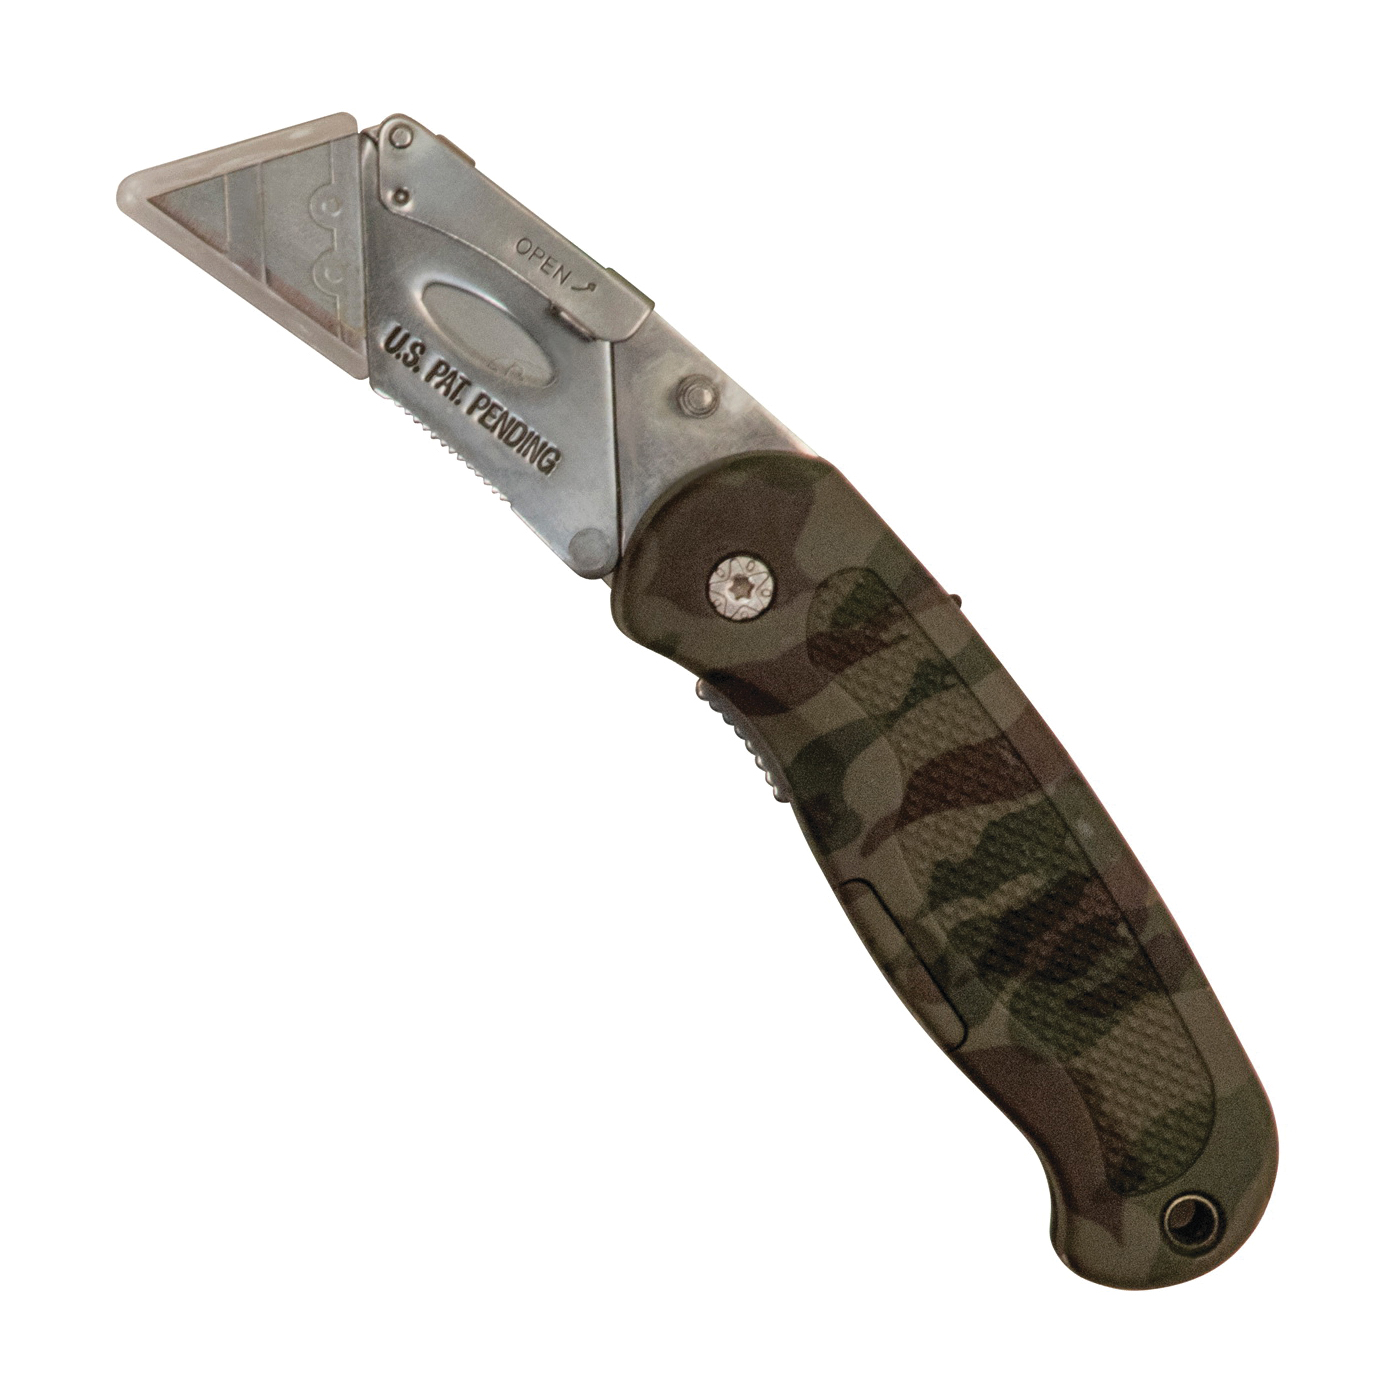 12131 Utility Knife, 2-1/2 in L Blade, Stainless Steel Blade, Curved Handle, Camouflage Handle